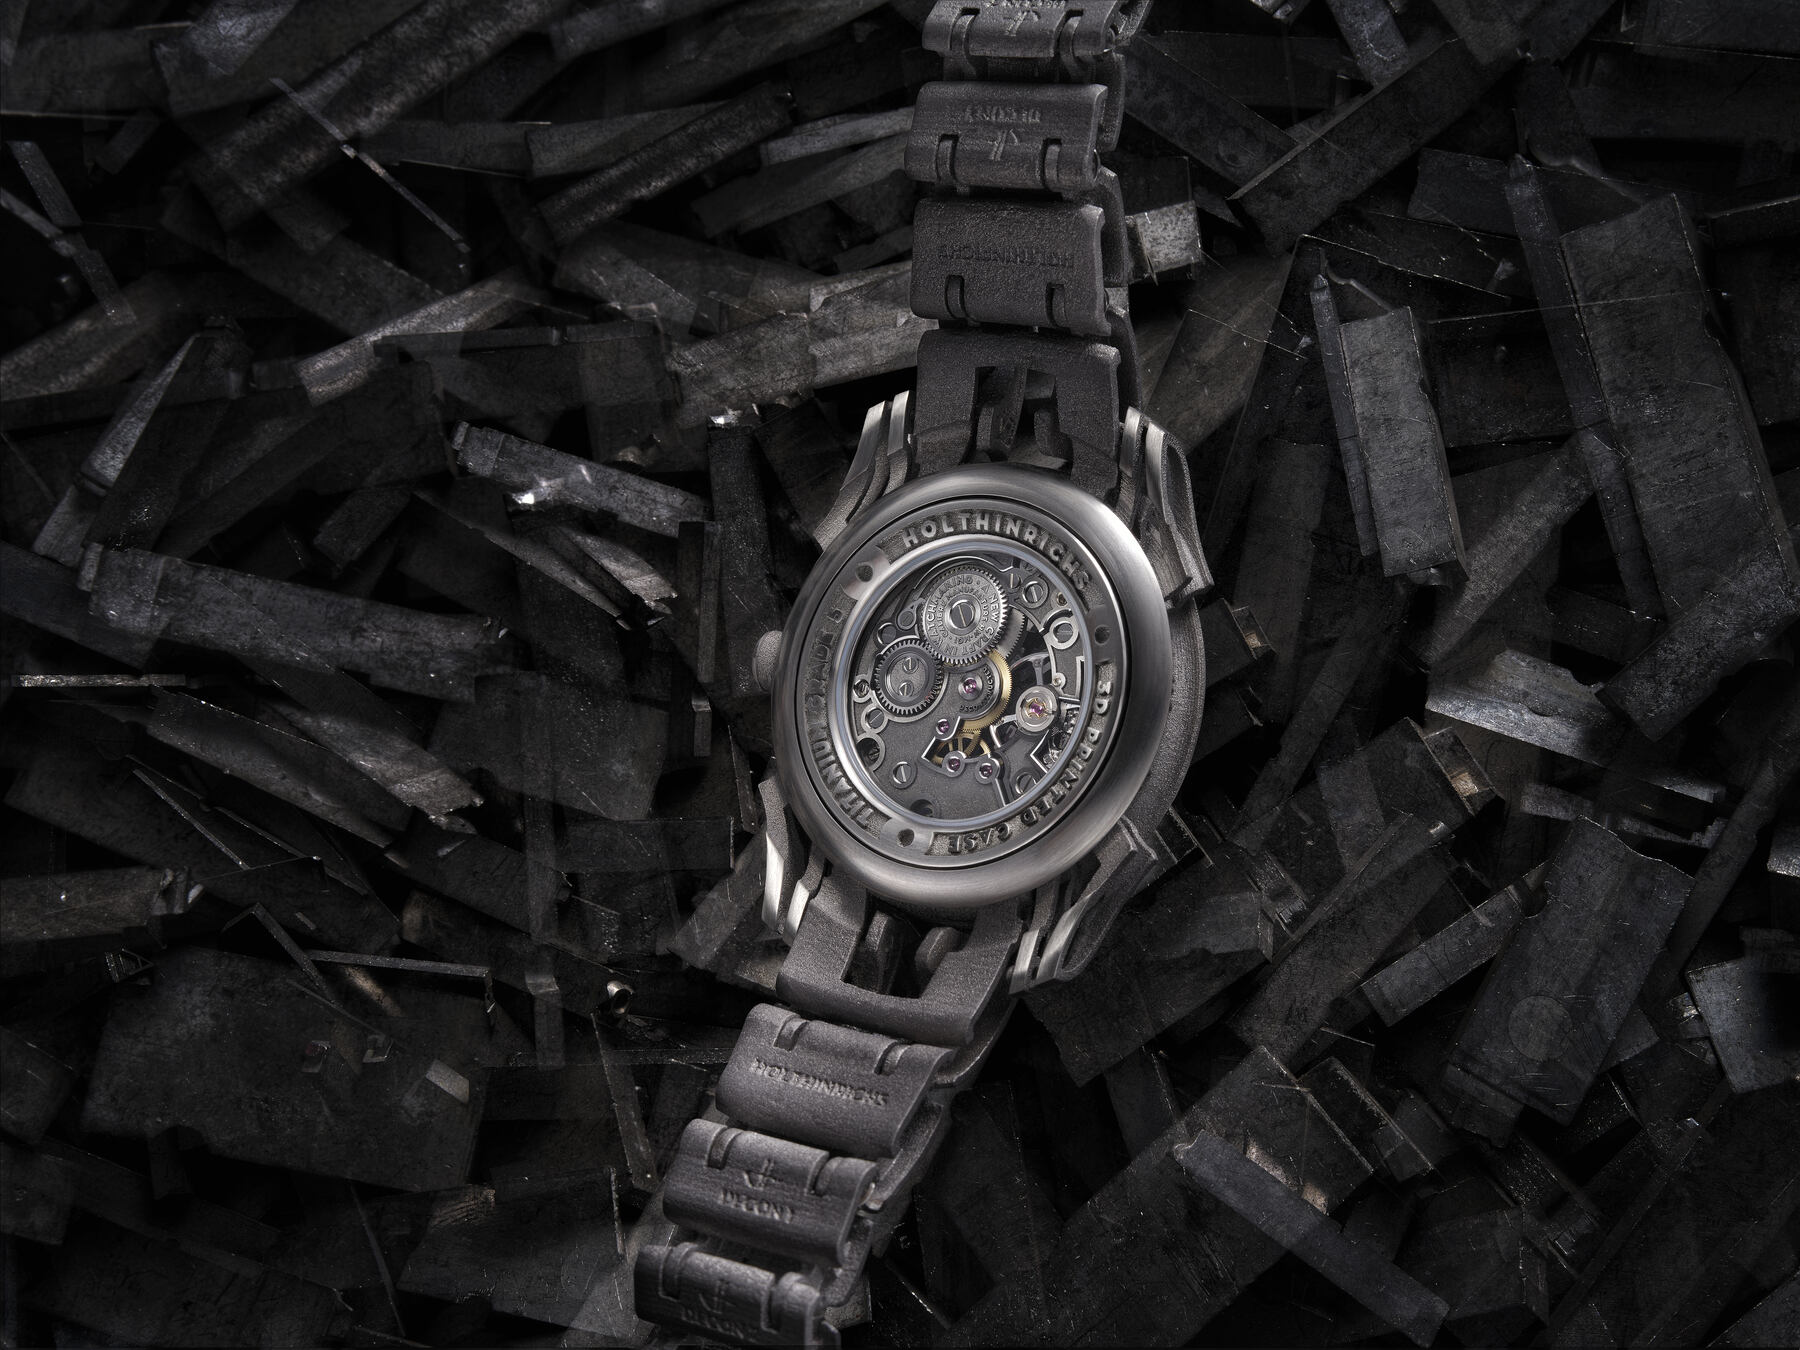 Introducing the Holthinrichs Watches DECONSTRUCTED